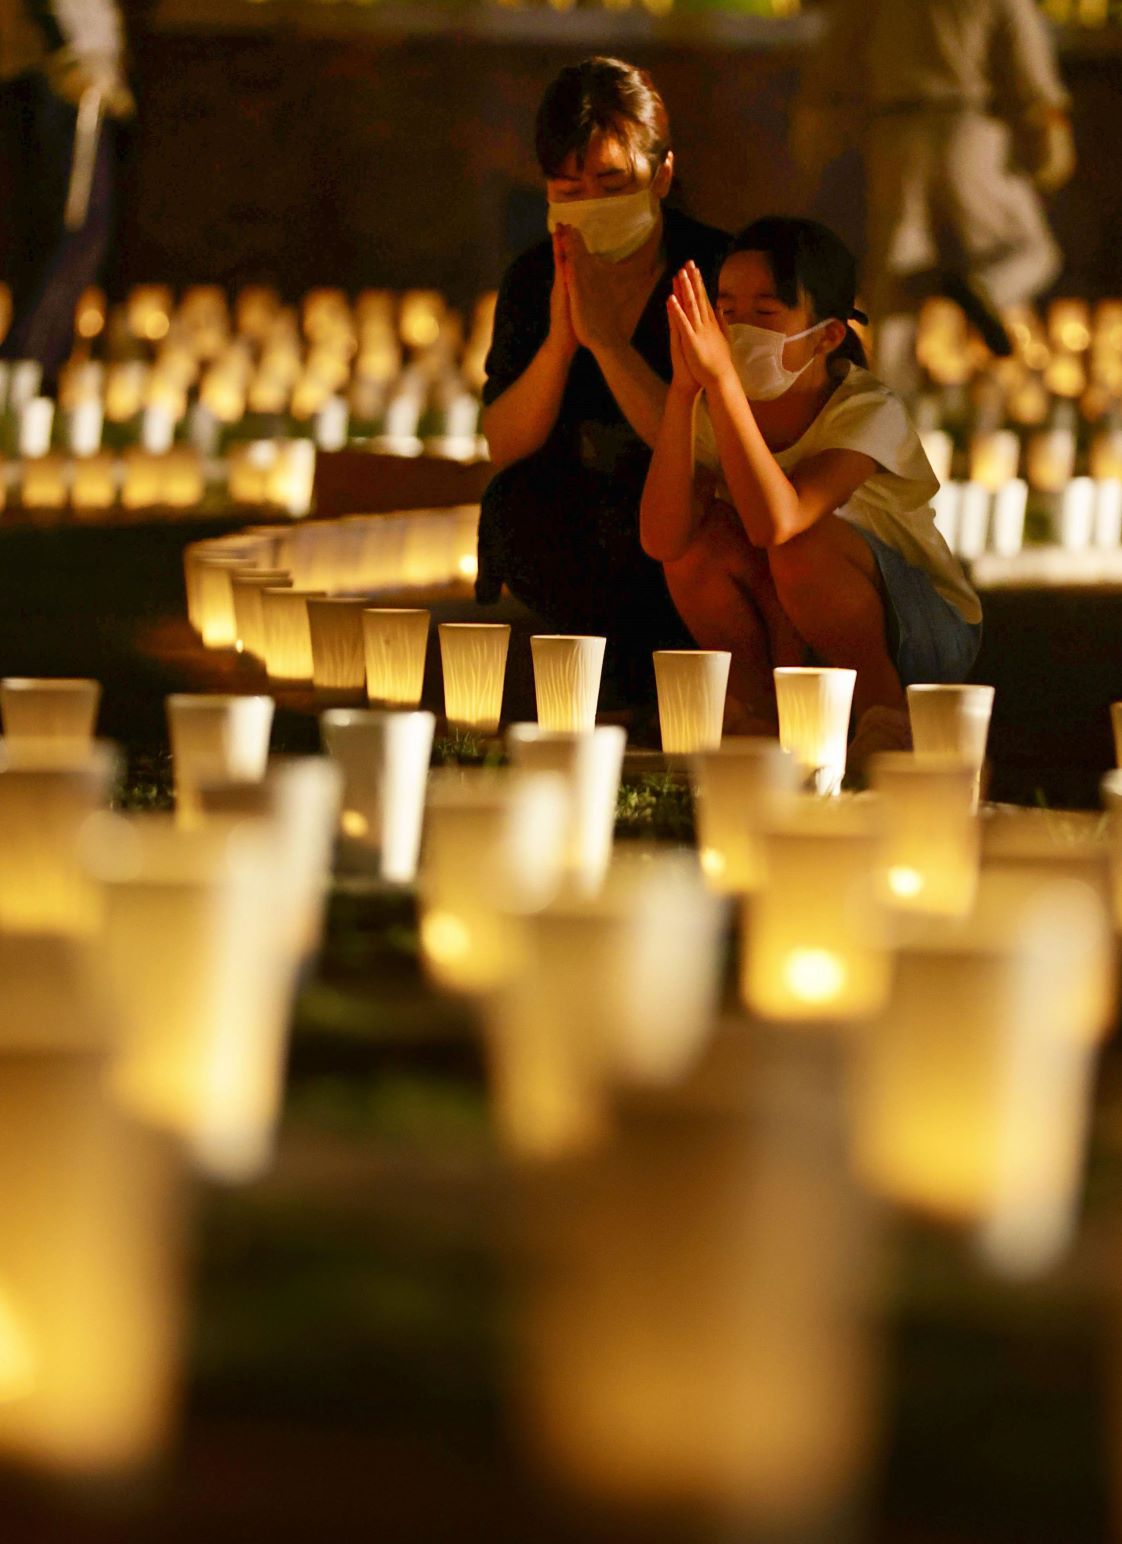 A mother and child put their hands together in front of candles lined at the Nagasaki Hypocenter Park in Nagasaki on Aug. 8, 2022. (Kyodo)